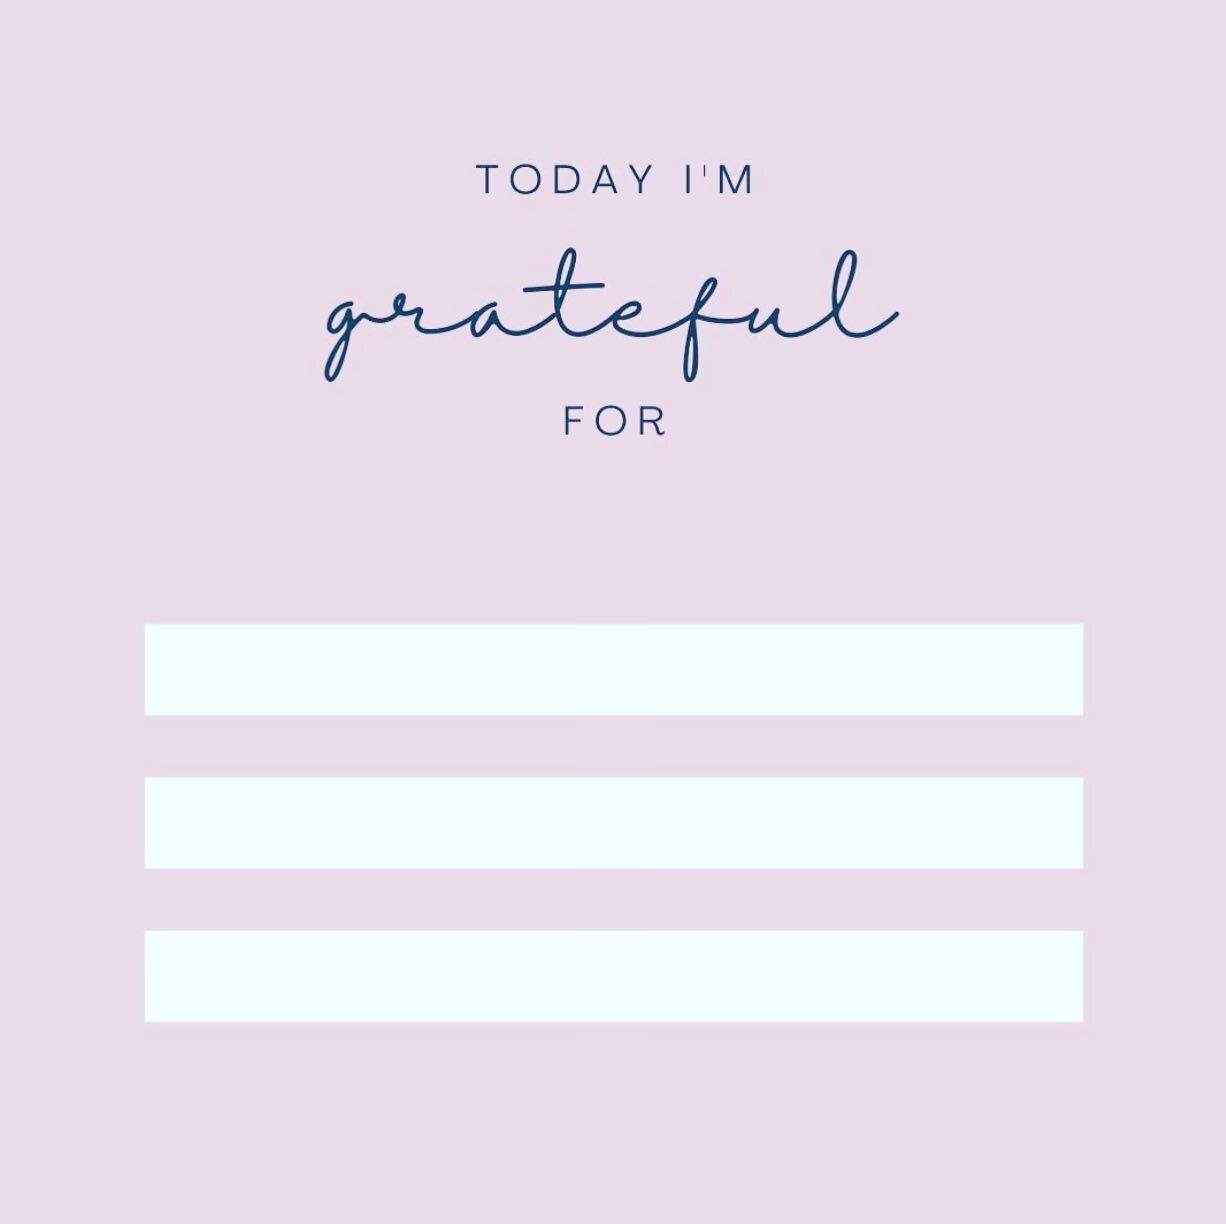 Today I&rsquo;m grateful for 1). Peace 2). Rest 3). Hope
What are you grateful for? Share below! 👇🏽 
#gratitude #hope #peace #rest #therapy counseling #mentalhealth #grateful #love #atlanta #hawaii #list